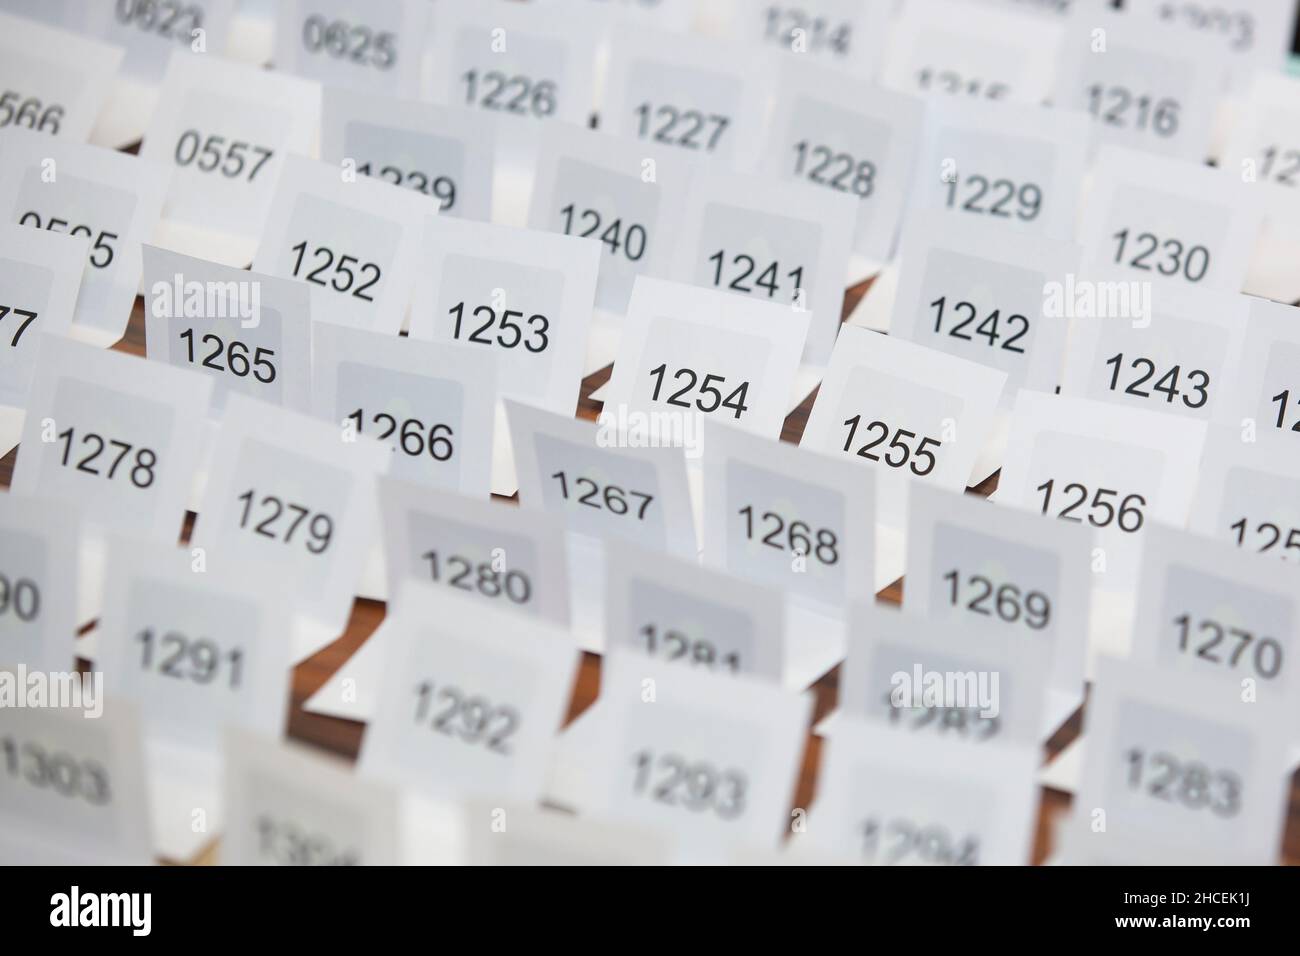 Different numbers printed on sheets of papers organized in a row Stock Photo